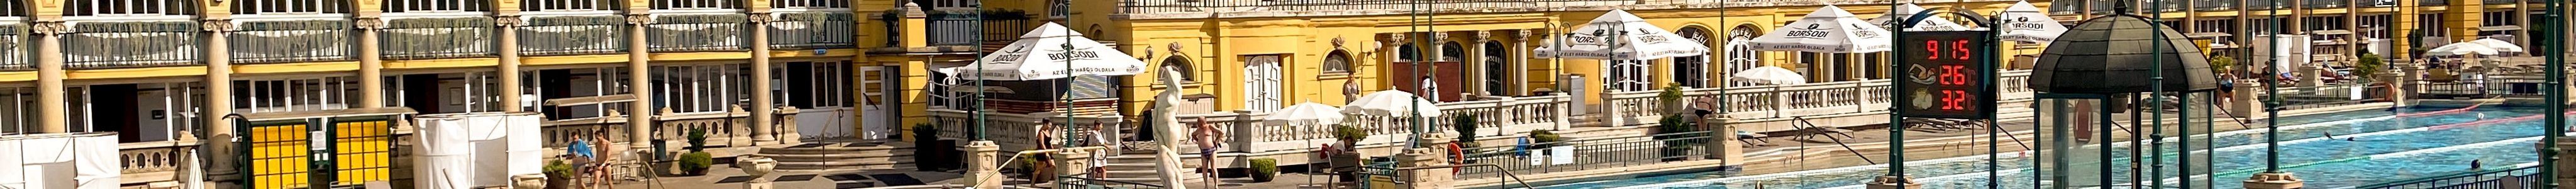 Thermal Baths & Spas in Budapest